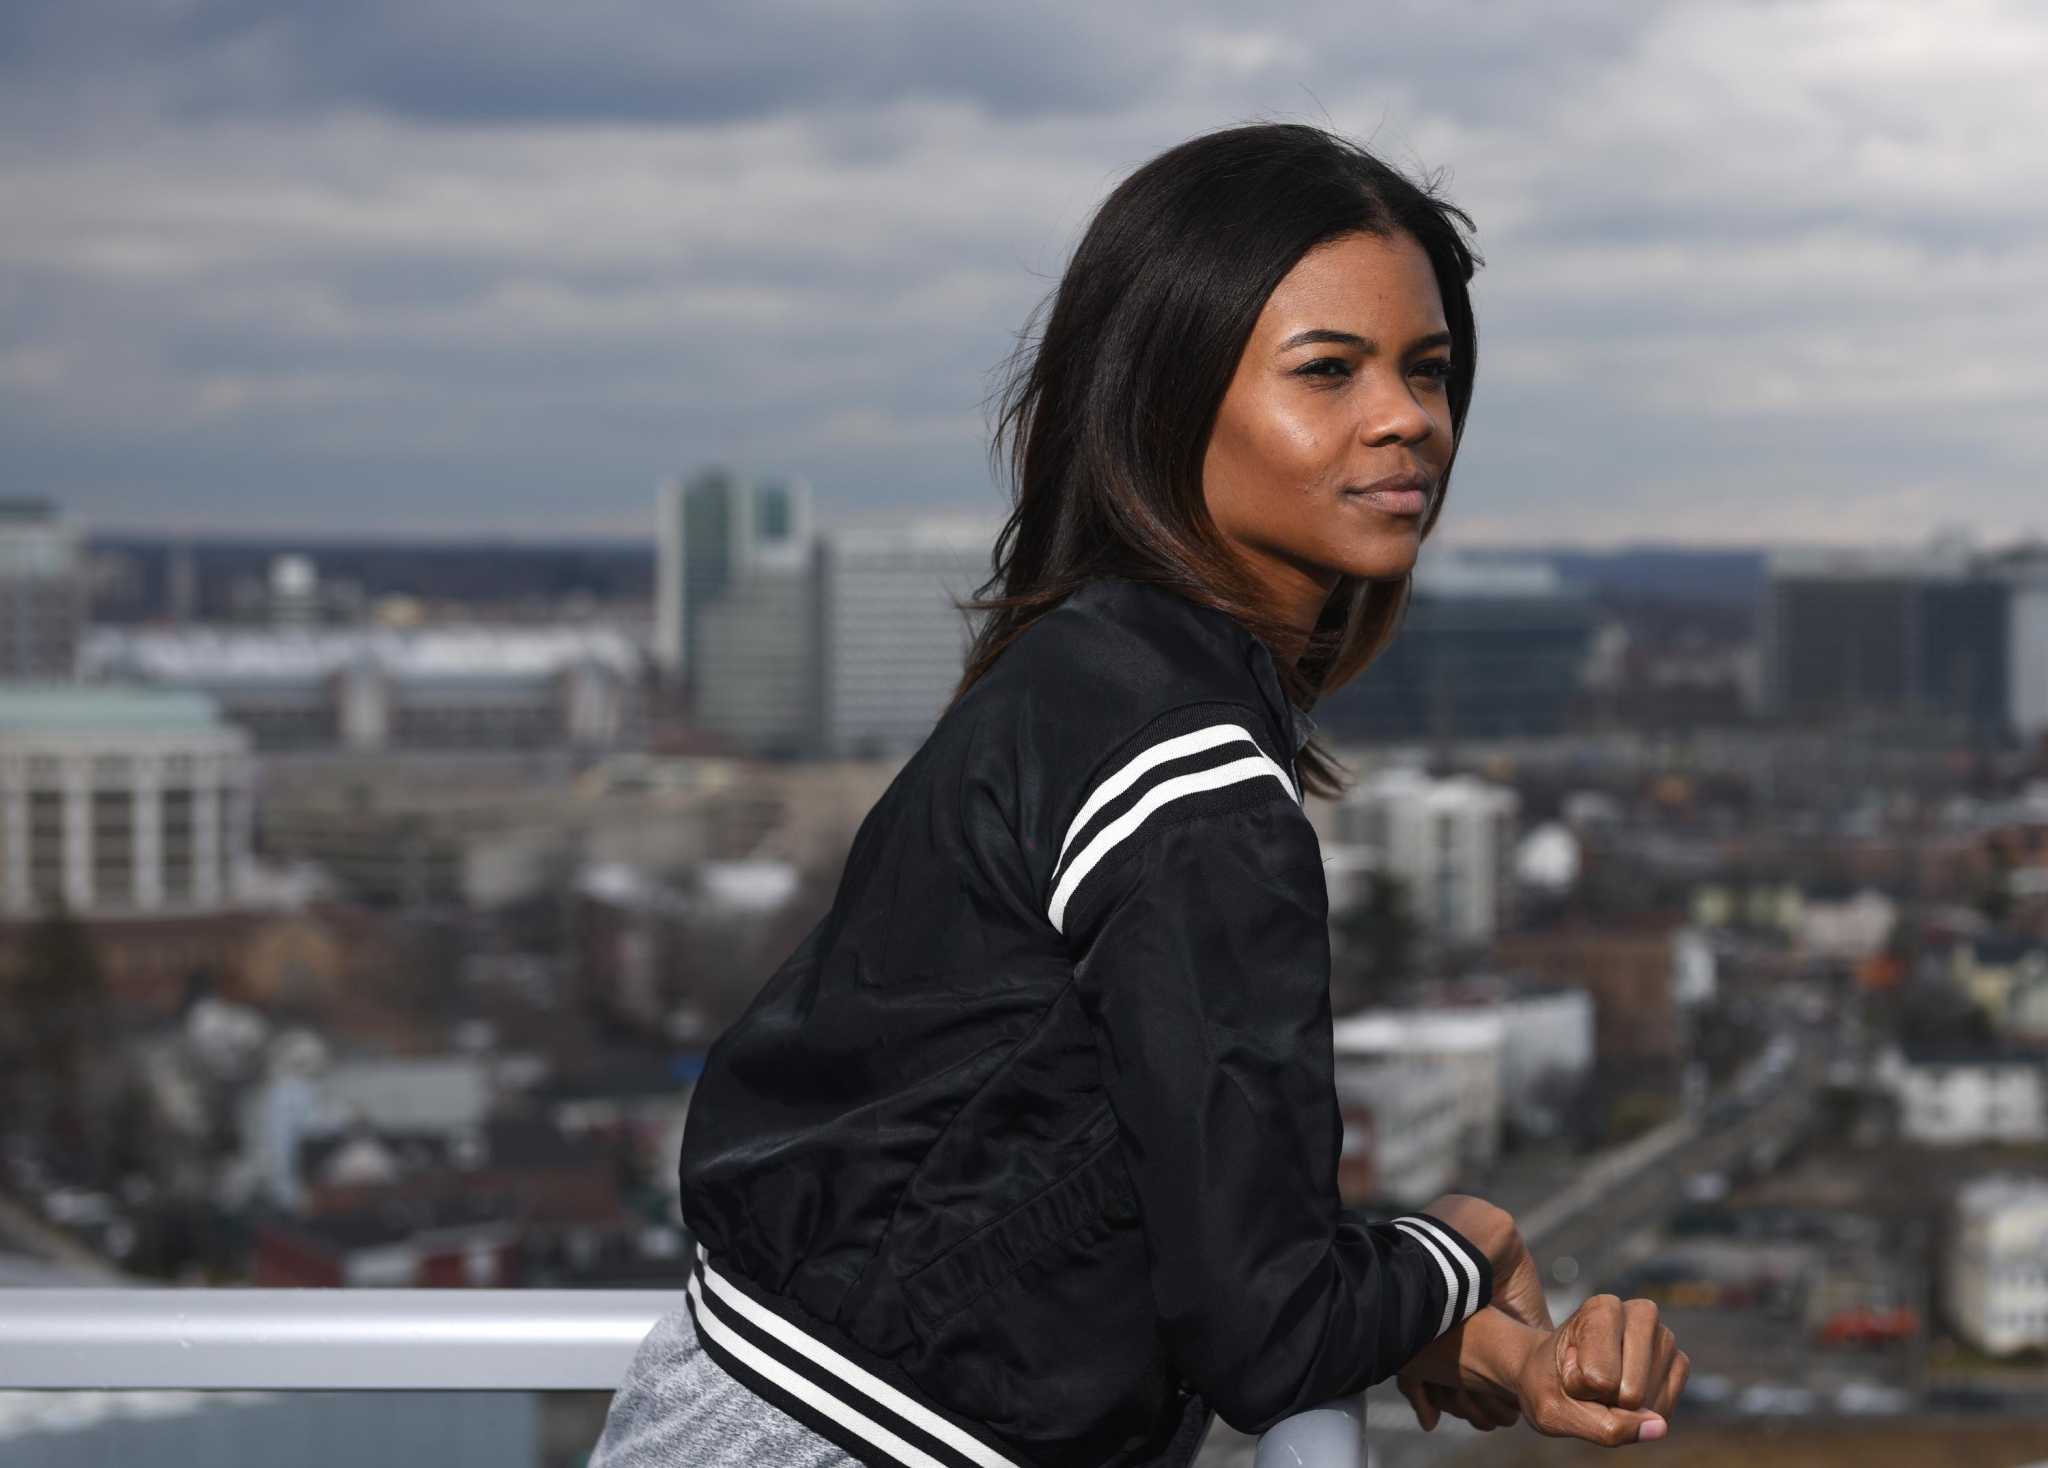 Mosque shooter reportedly 'influenced' by Stamford’s own Candace Owens...